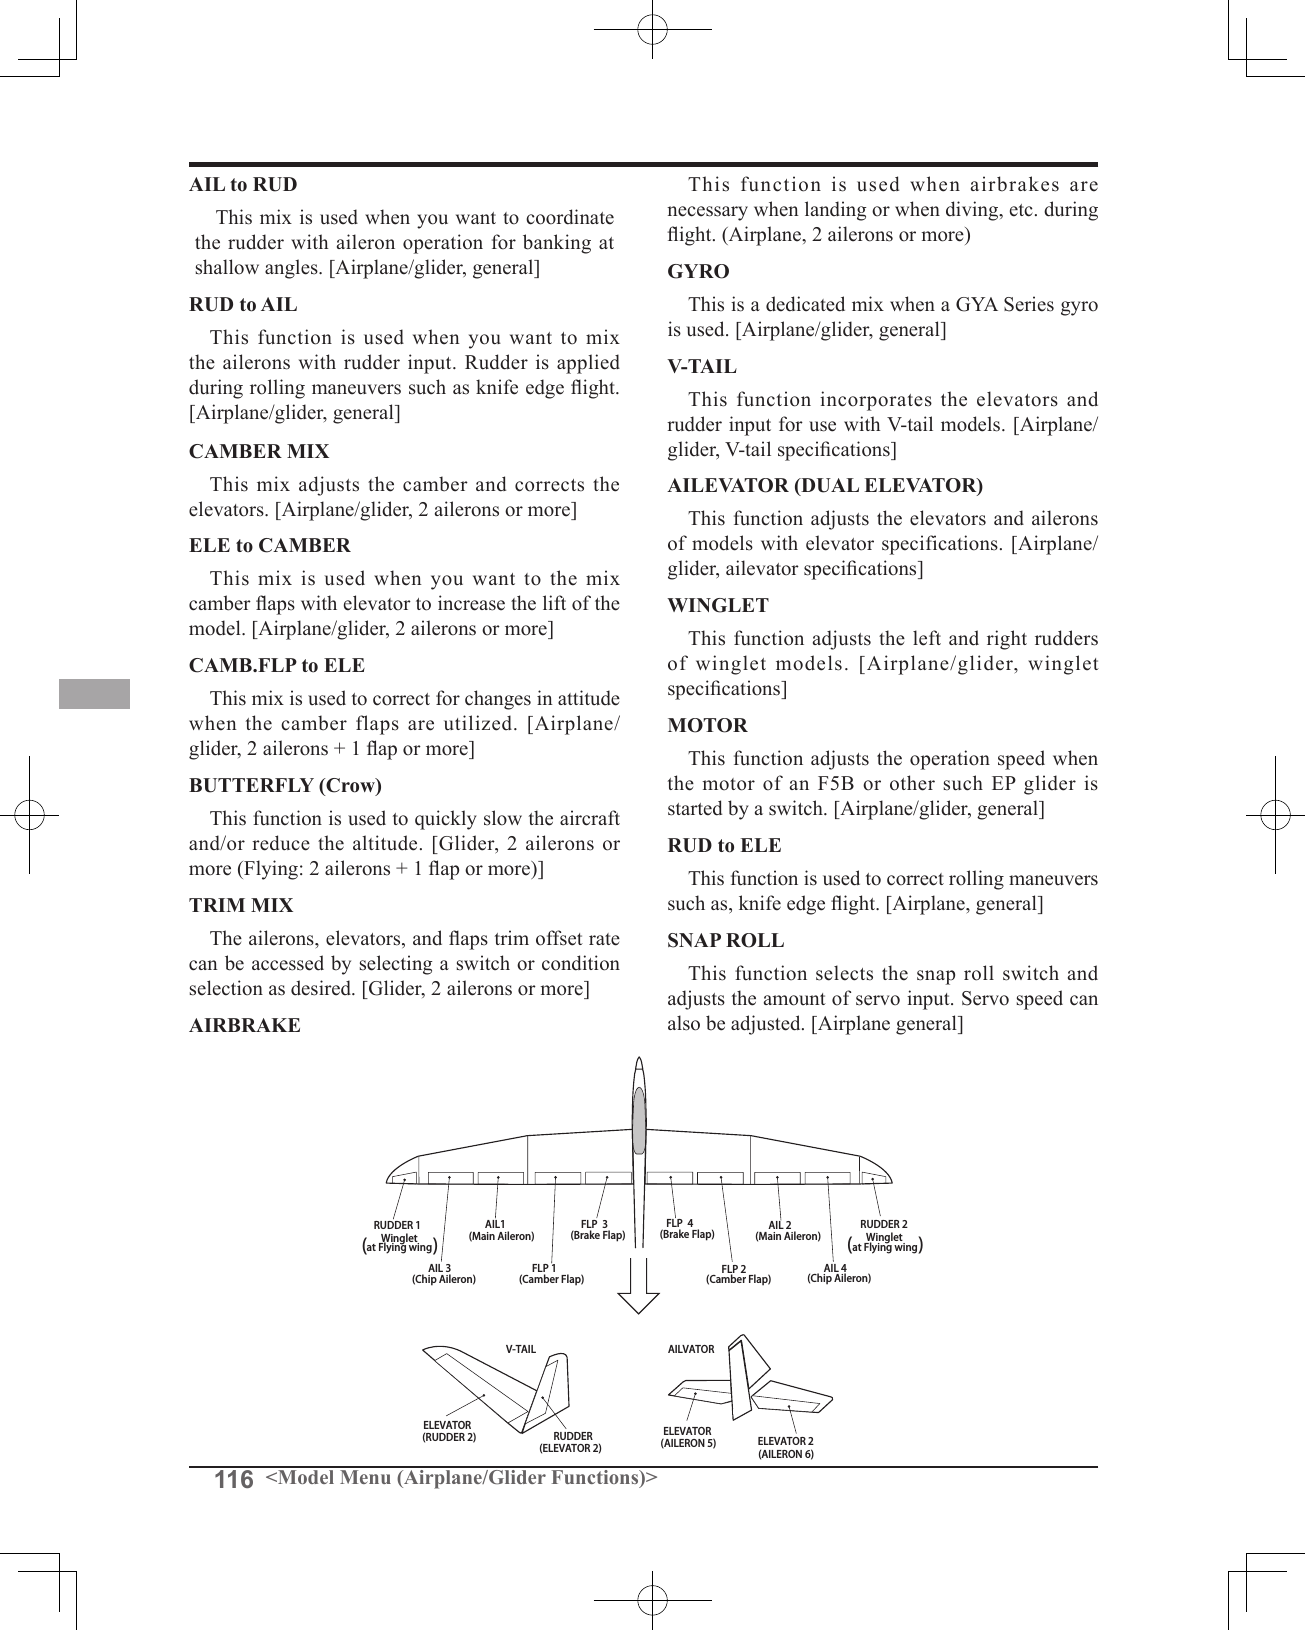 116 &lt;Model Menu (Airplane/Glider Functions)&gt;AIL 3(Chip Aileron) AIL 4(Chip Aileron)AIL1(Main Aileron) AIL 2(Main Aileron)FLP 2(Camber Flap)FLP 1(Camber Flap)ELEVATOR(ELEVATOR 2)V-TAIL AILVATORFLP  3(Brake Flap)FLP  4(Brake Flap) RUDDER 2 WingletRUDDER 1RUDDER (RUDDER 2) Wingletat Flying wing at Flying wing(                ) (                )ELEVATOR ELEVATOR 2(AILERON 5) (AILERON 6)AIL to RUDThis mix is used when you want to coordinate the rudder with aileron operation for banking at shallow angles. [Airplane/glider, general]RUD to AILThis function is used when you want to mix the ailerons with rudder input. Rudder is applied during rolling maneuvers such as knife edge ight. [Airplane/glider, general]CAMBER MIXThis mix adjusts the camber and corrects the elevators. [Airplane/glider, 2 ailerons or more]ELE to CAMBERThis mix is used when you want to the mix camber aps with elevator to increase the lift of the model. [Airplane/glider, 2 ailerons or more]CAMB.FLP to ELEThis mix is used to correct for changes in attitude when the camber flaps are utilized. [Airplane/glider, 2 ailerons + 1 ap or more]BUTTERFLY (Crow)This function is used to quickly slow the aircraft and/or reduce the altitude. [Glider, 2 ailerons or more (Flying: 2 ailerons + 1 ap or more)]TRIM MIXThe ailerons, elevators, and aps trim offset rate can be accessed by selecting a switch or condition selection as desired. [Glider, 2 ailerons or more]AIRBRAKEThis function is used when airbrakes are necessary when landing or when diving, etc. during ight. (Airplane, 2 ailerons or more)GYROThis is a dedicated mix when a GYA Series gyro is used. [Airplane/glider, general]V-TAILThis function incorporates the elevators and rudder input for use with V-tail models. [Airplane/glider, V-tail specications]AILEVATOR (DUAL ELEVATOR)This function adjusts the elevators and ailerons of models with elevator specifications. [Airplane/glider, ailevator specications]WINGLETThis function adjusts the left and right rudders of winglet models. [Airplane/glider, winglet specications]MOTORThis function adjusts the operation speed when the motor of an F5B or other such EP glider is started by a switch. [Airplane/glider, general]RUD to ELEThis function is used to correct rolling maneuvers such as, knife edge ight. [Airplane, general]SNAP ROLLThis function selects the snap roll switch and adjusts the amount of servo input. Servo speed can also be adjusted. [Airplane general]